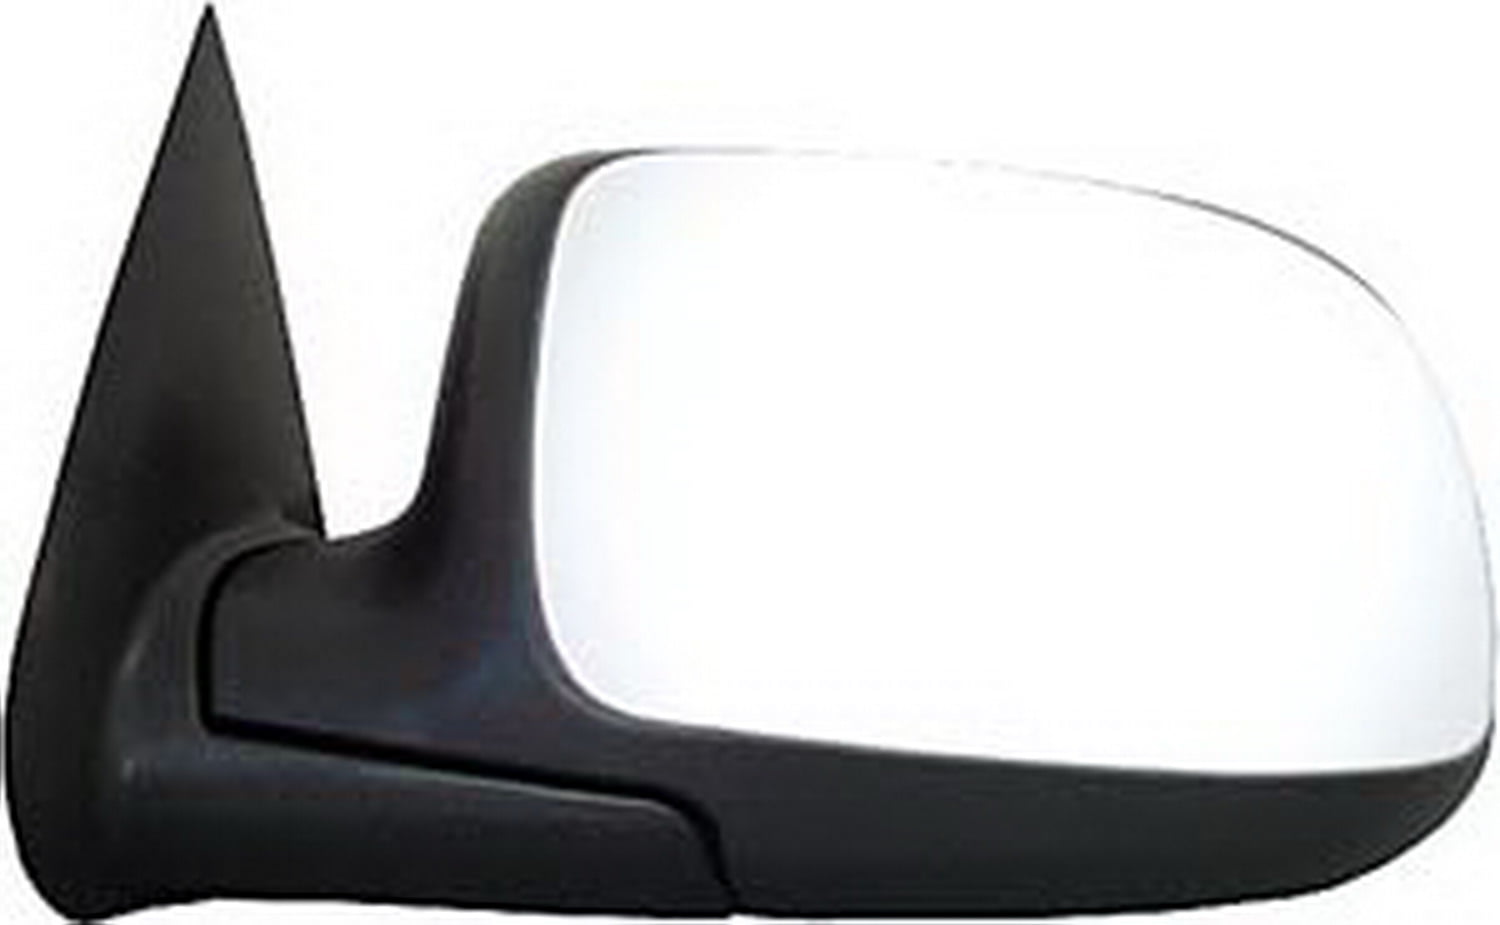 Original Style Replacement Mirror Chevrolet/GMC/Cadillac Driver Side Manual Foldaway Non-Heated Chrome Cap